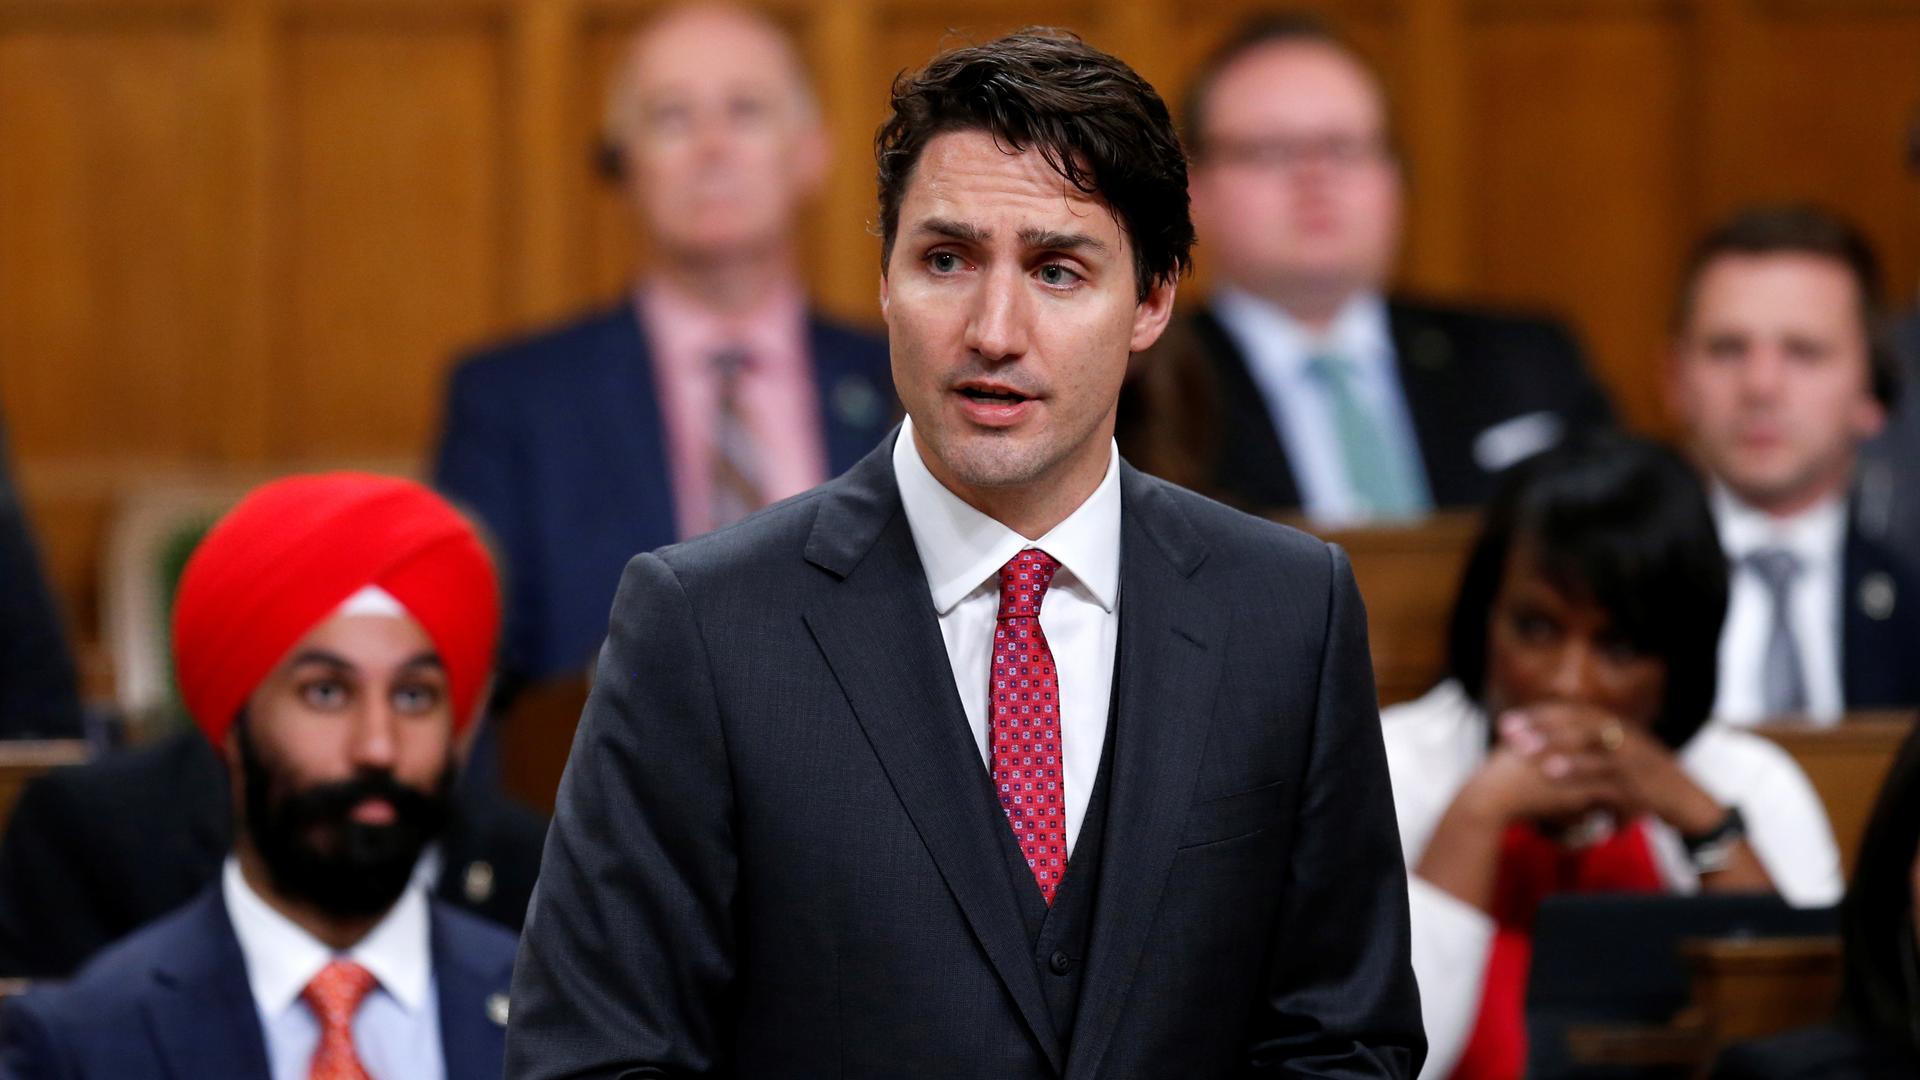 Canada's Prime Minister, Justin Trudeau, delivers a formal apology for the Komagata Maru incident in the House of Commons on Parliament Hill in Ottawa, Canada, May 18th 2016.